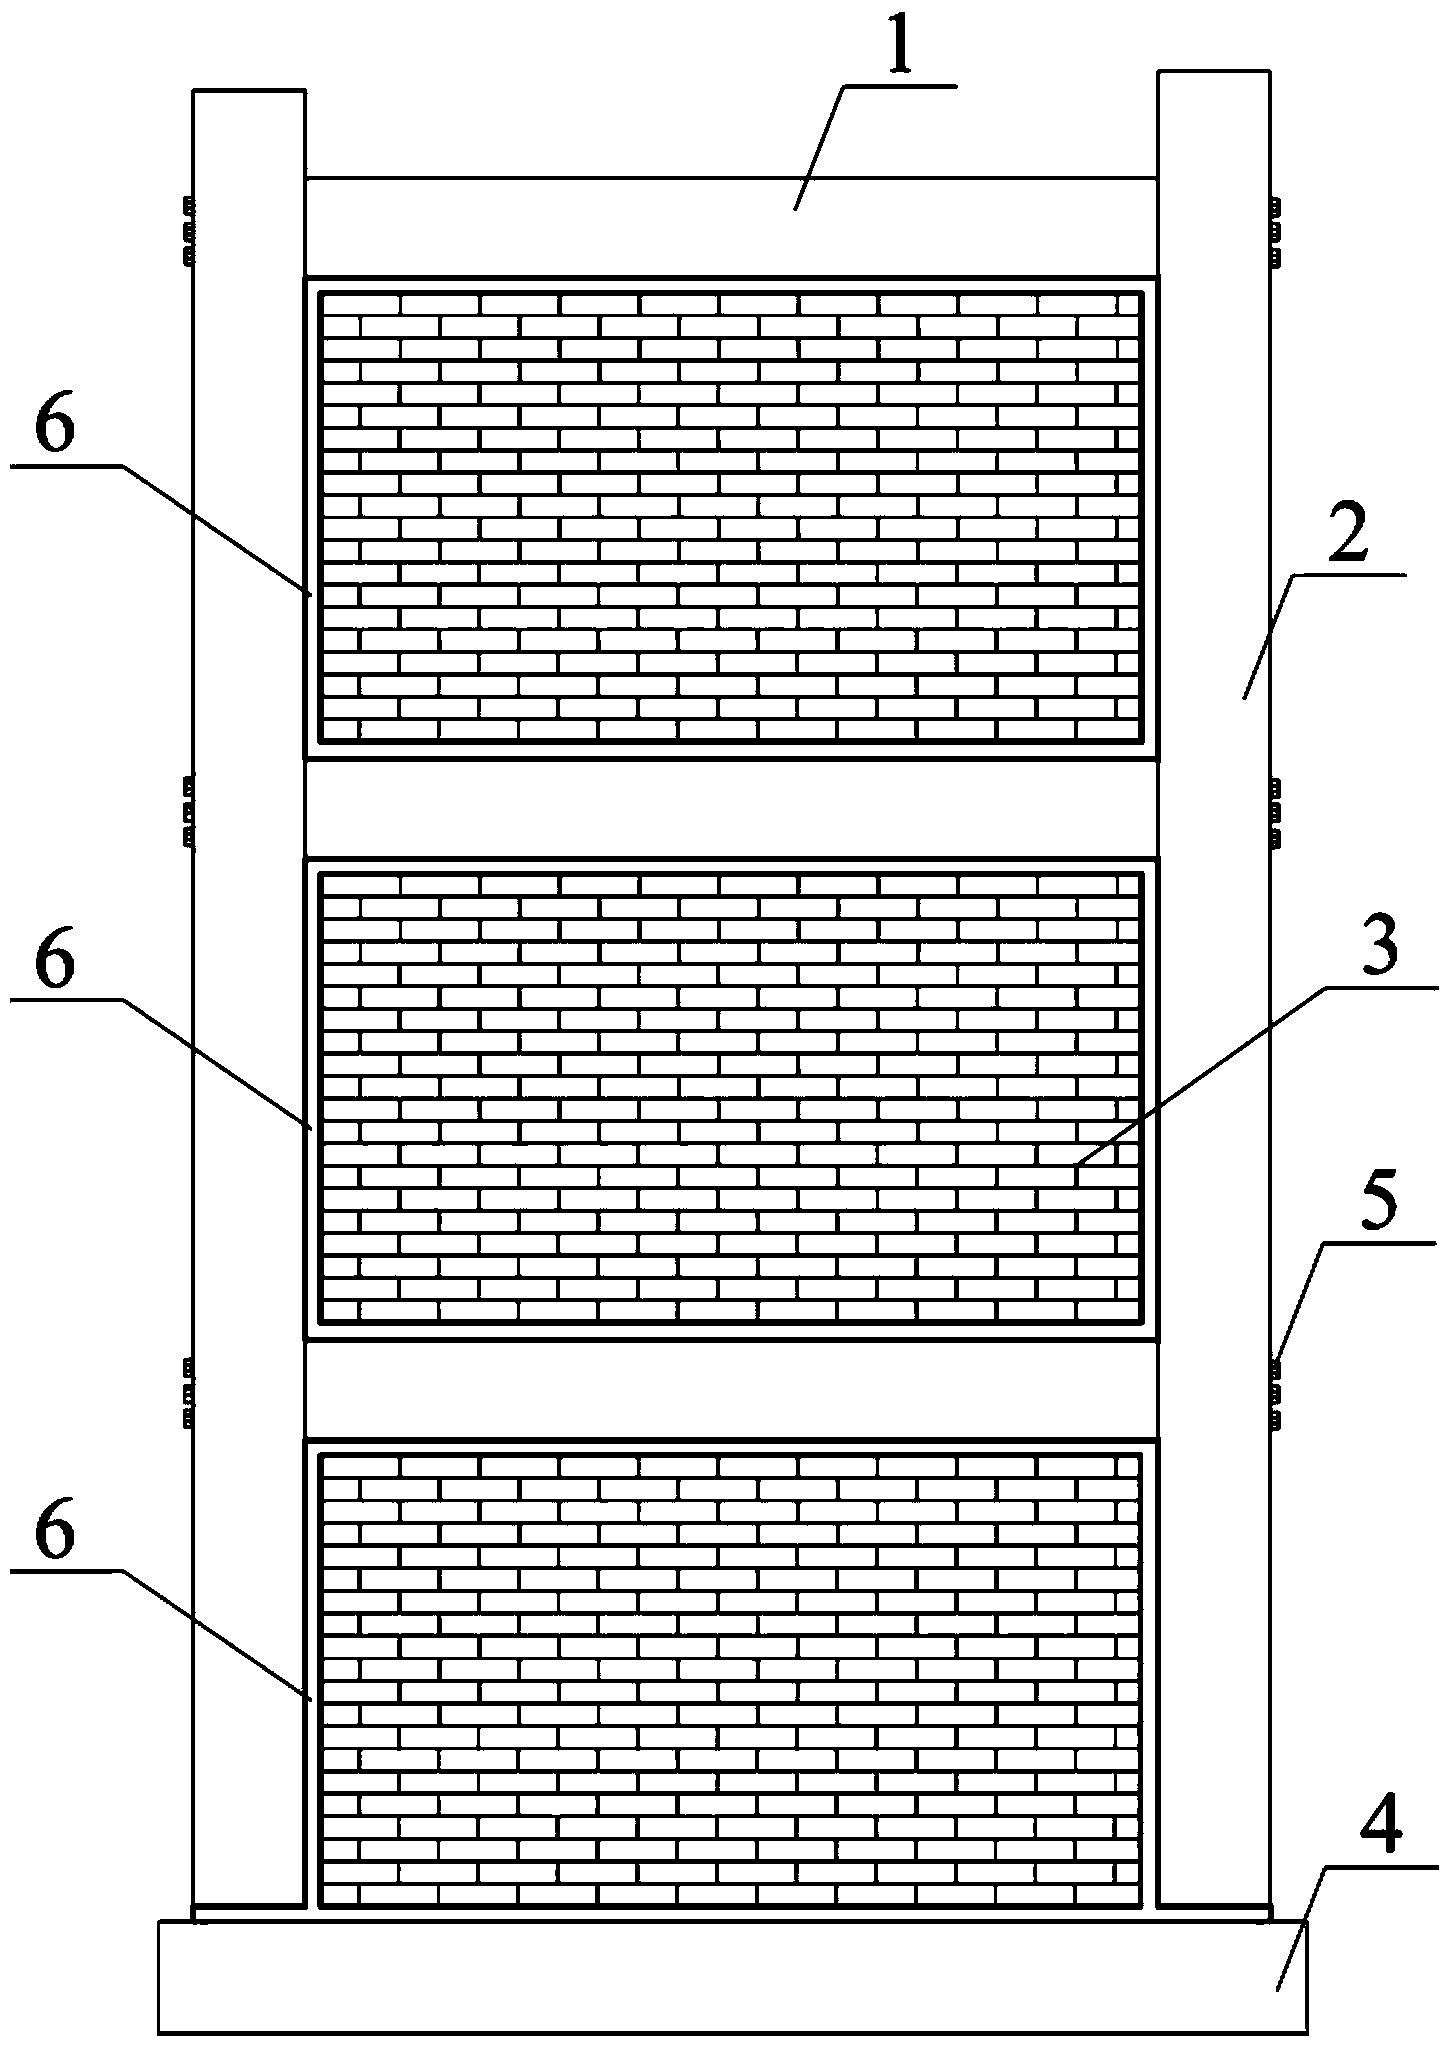 Self-reset girder-grid friction wall structural system